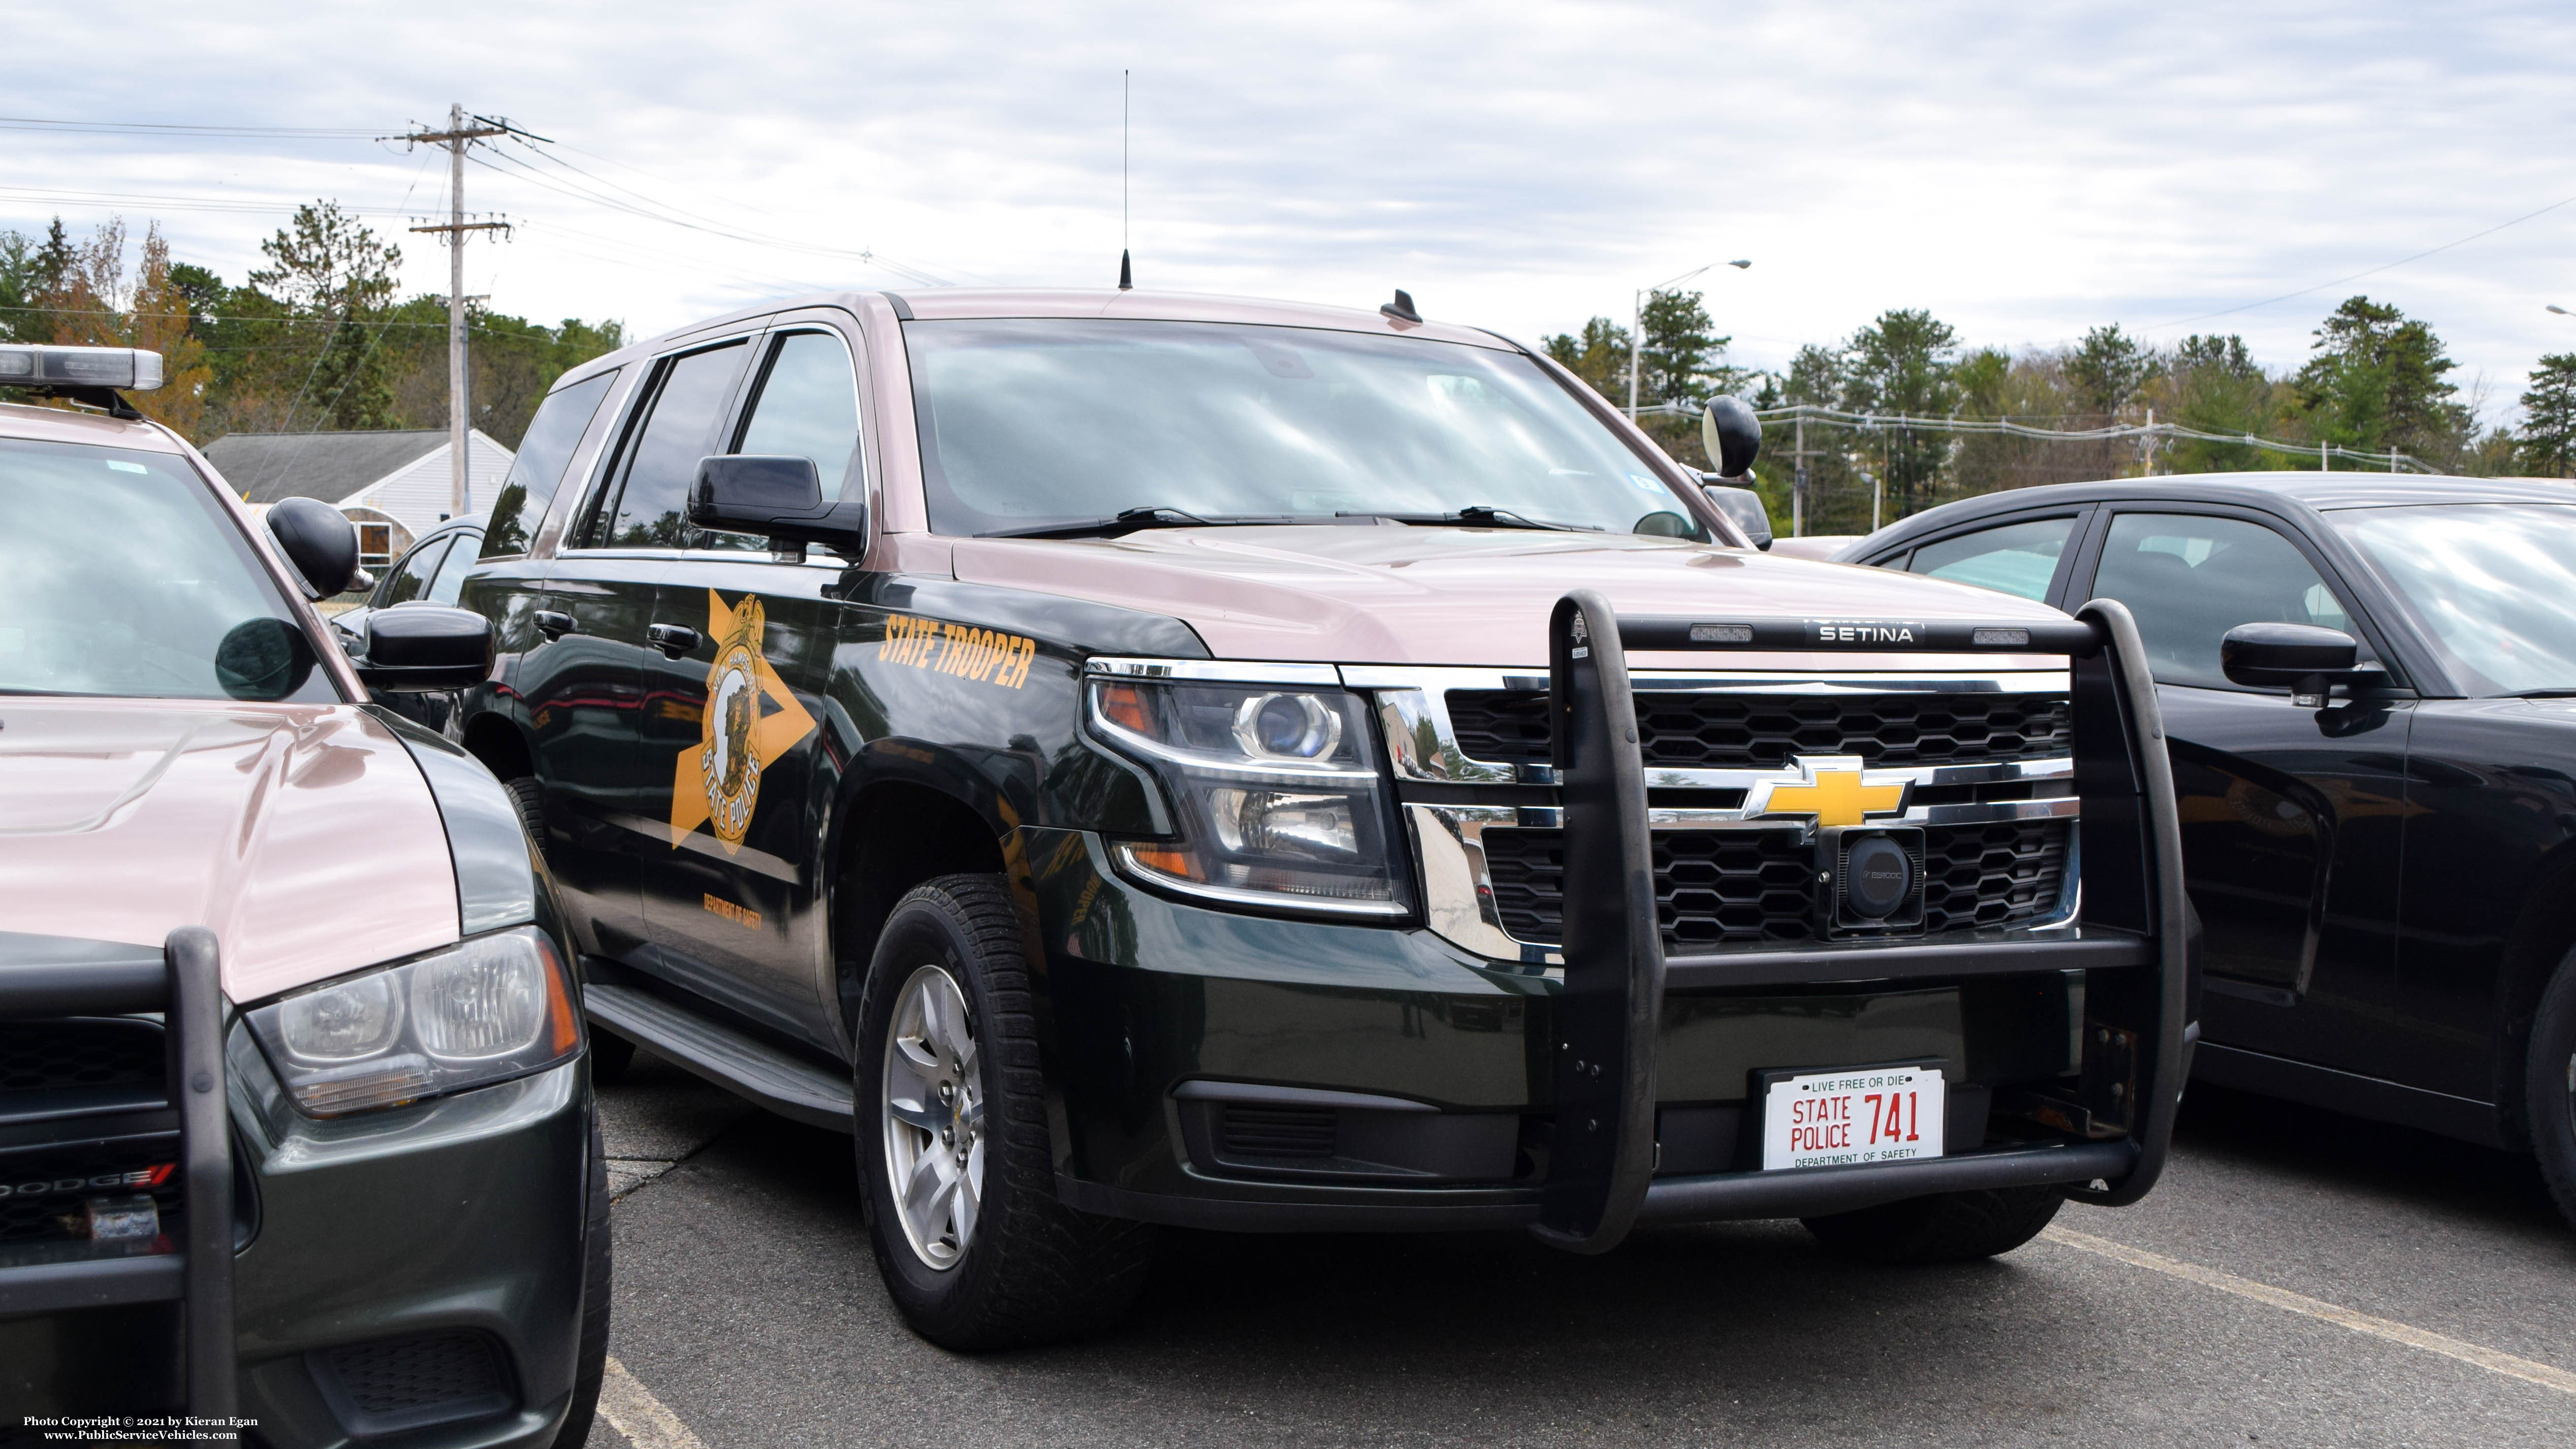 A photo  of New Hampshire State Police
            Cruiser 741, a 2015-2019 Chevrolet Tahoe             taken by Kieran Egan